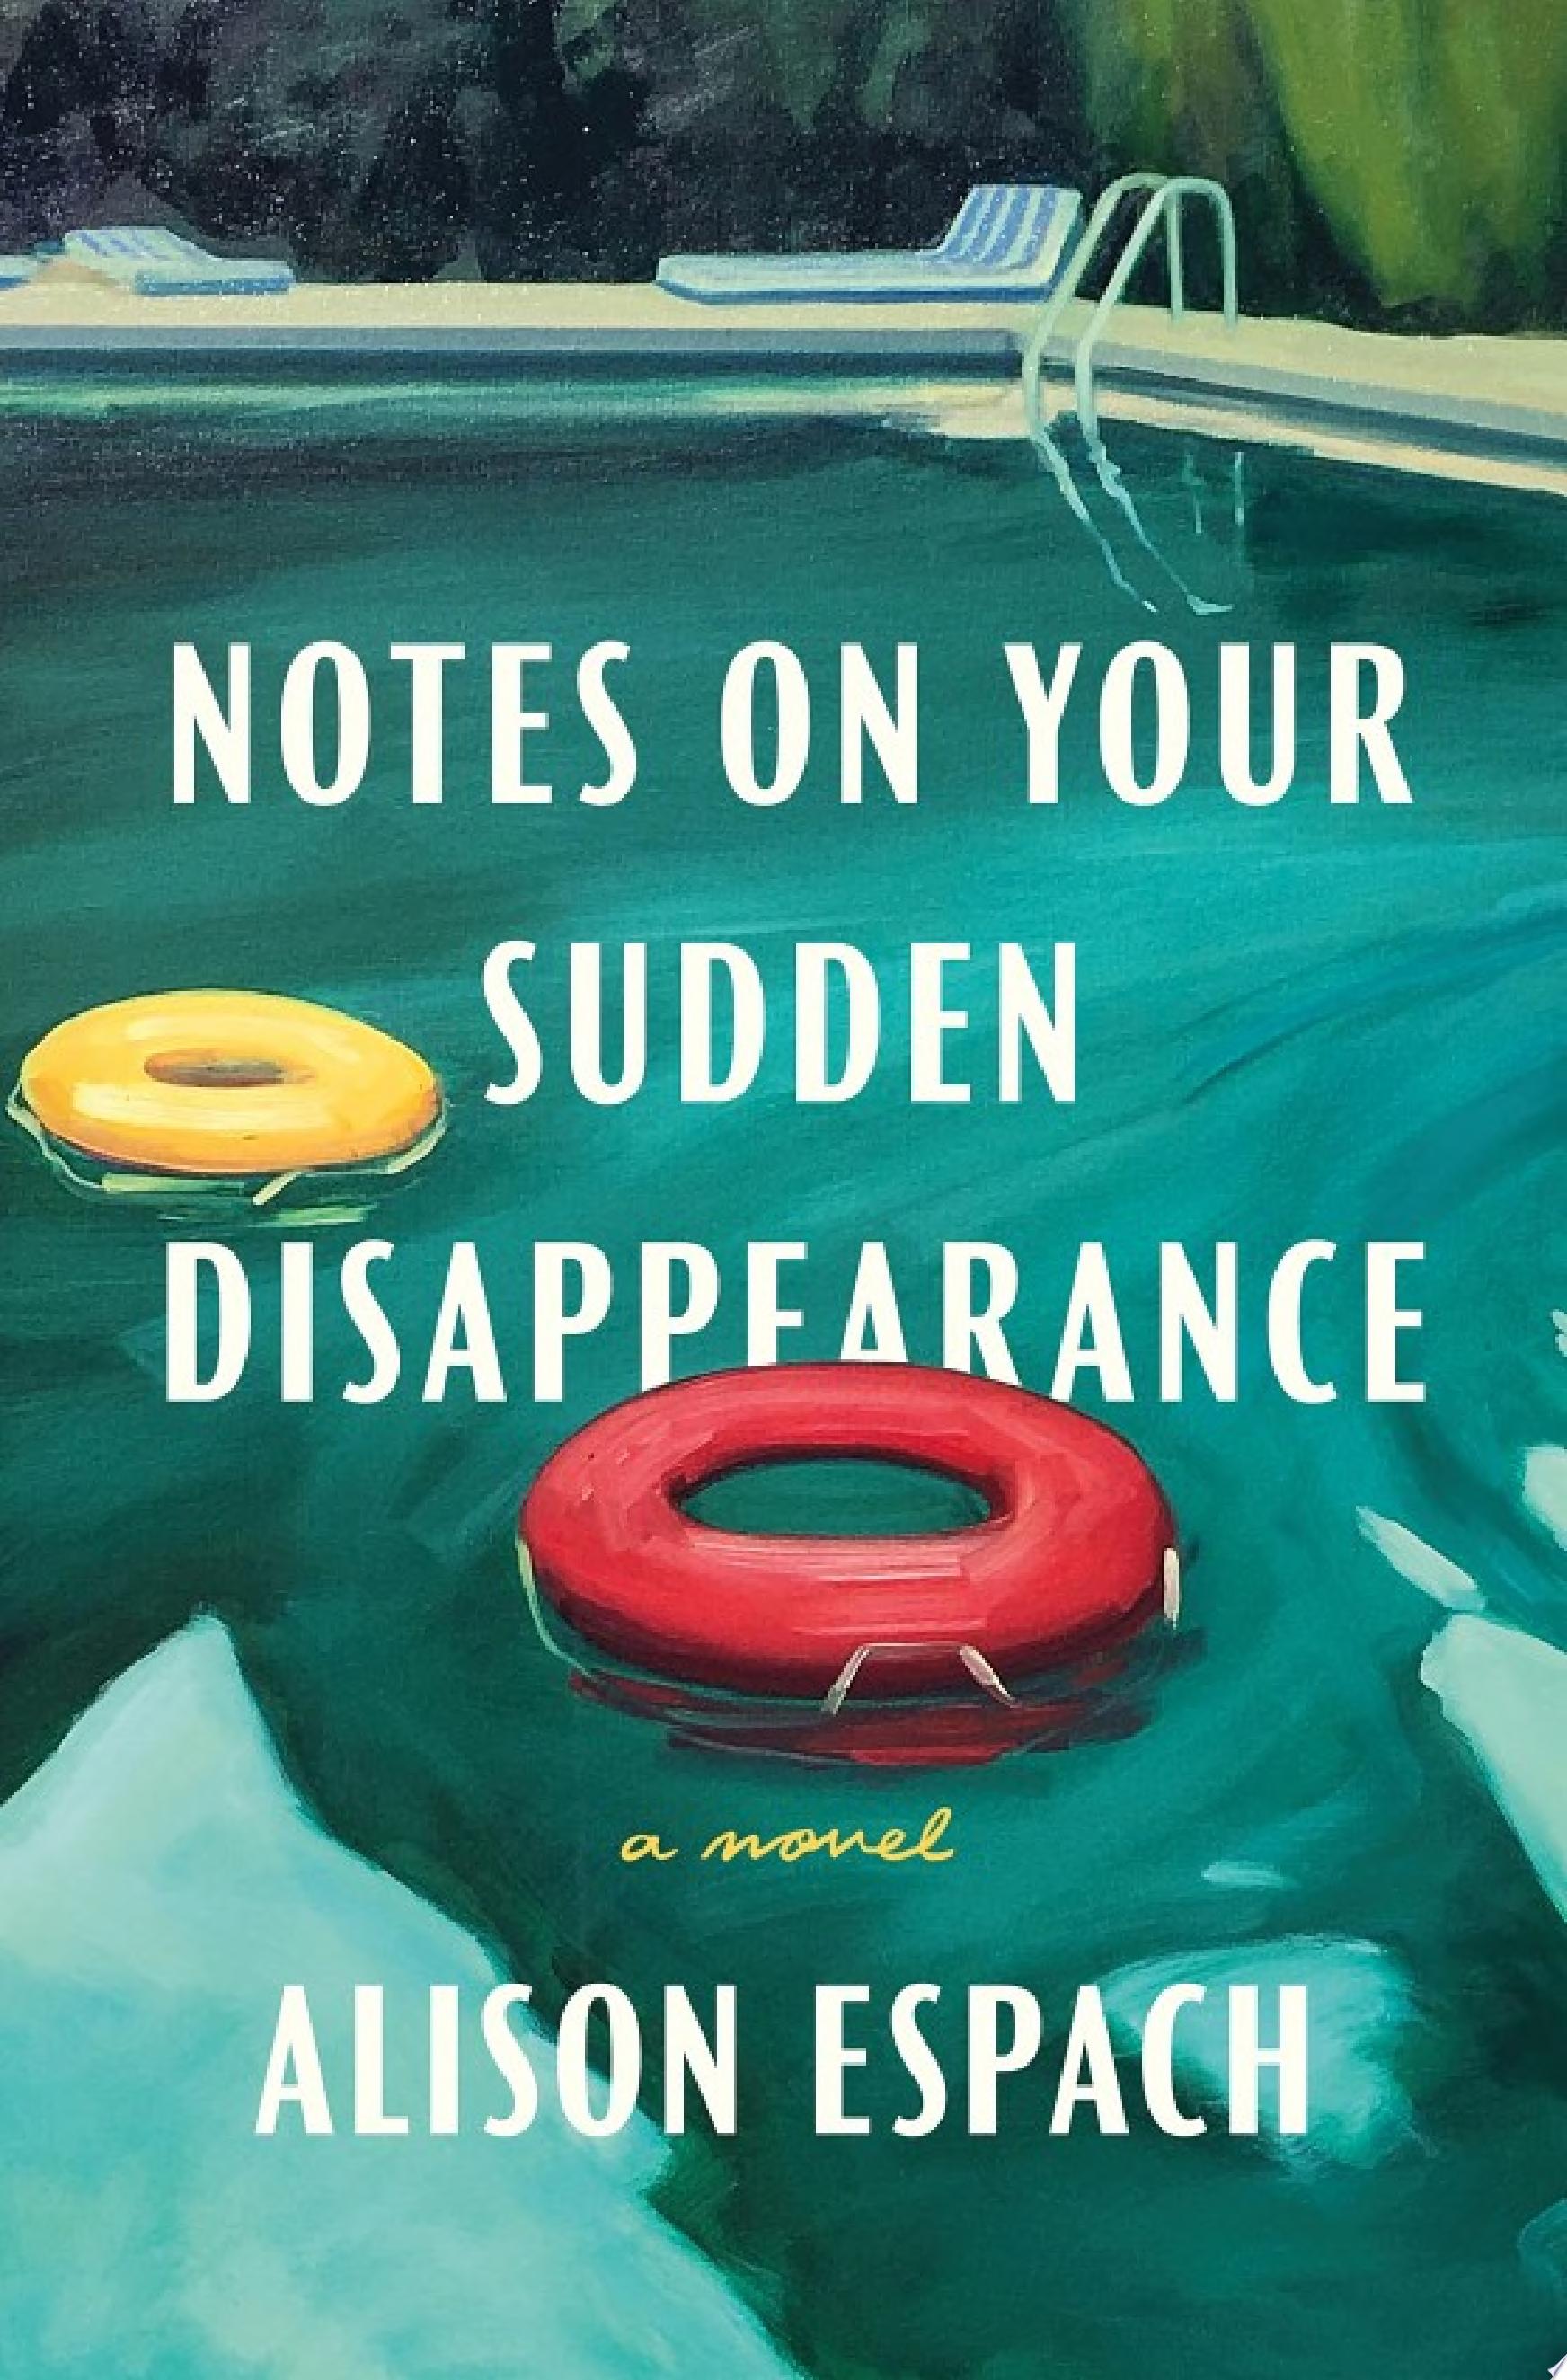 Image for "Notes on Your Sudden Disappearance"